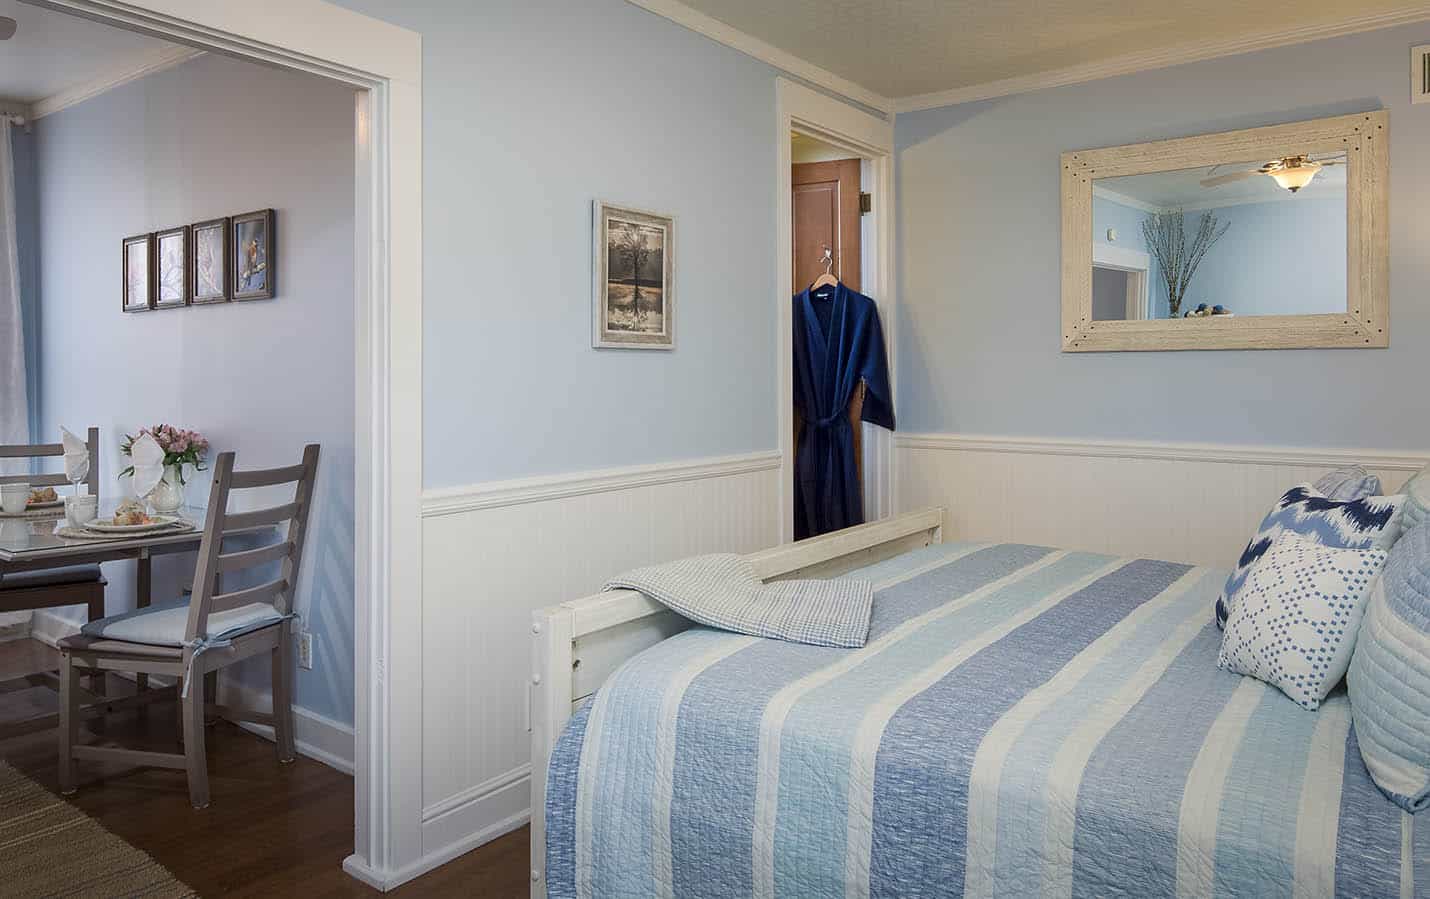 Footer of the bed and view of the bathroom entry.  Dark blue robe hanging in the bathroom